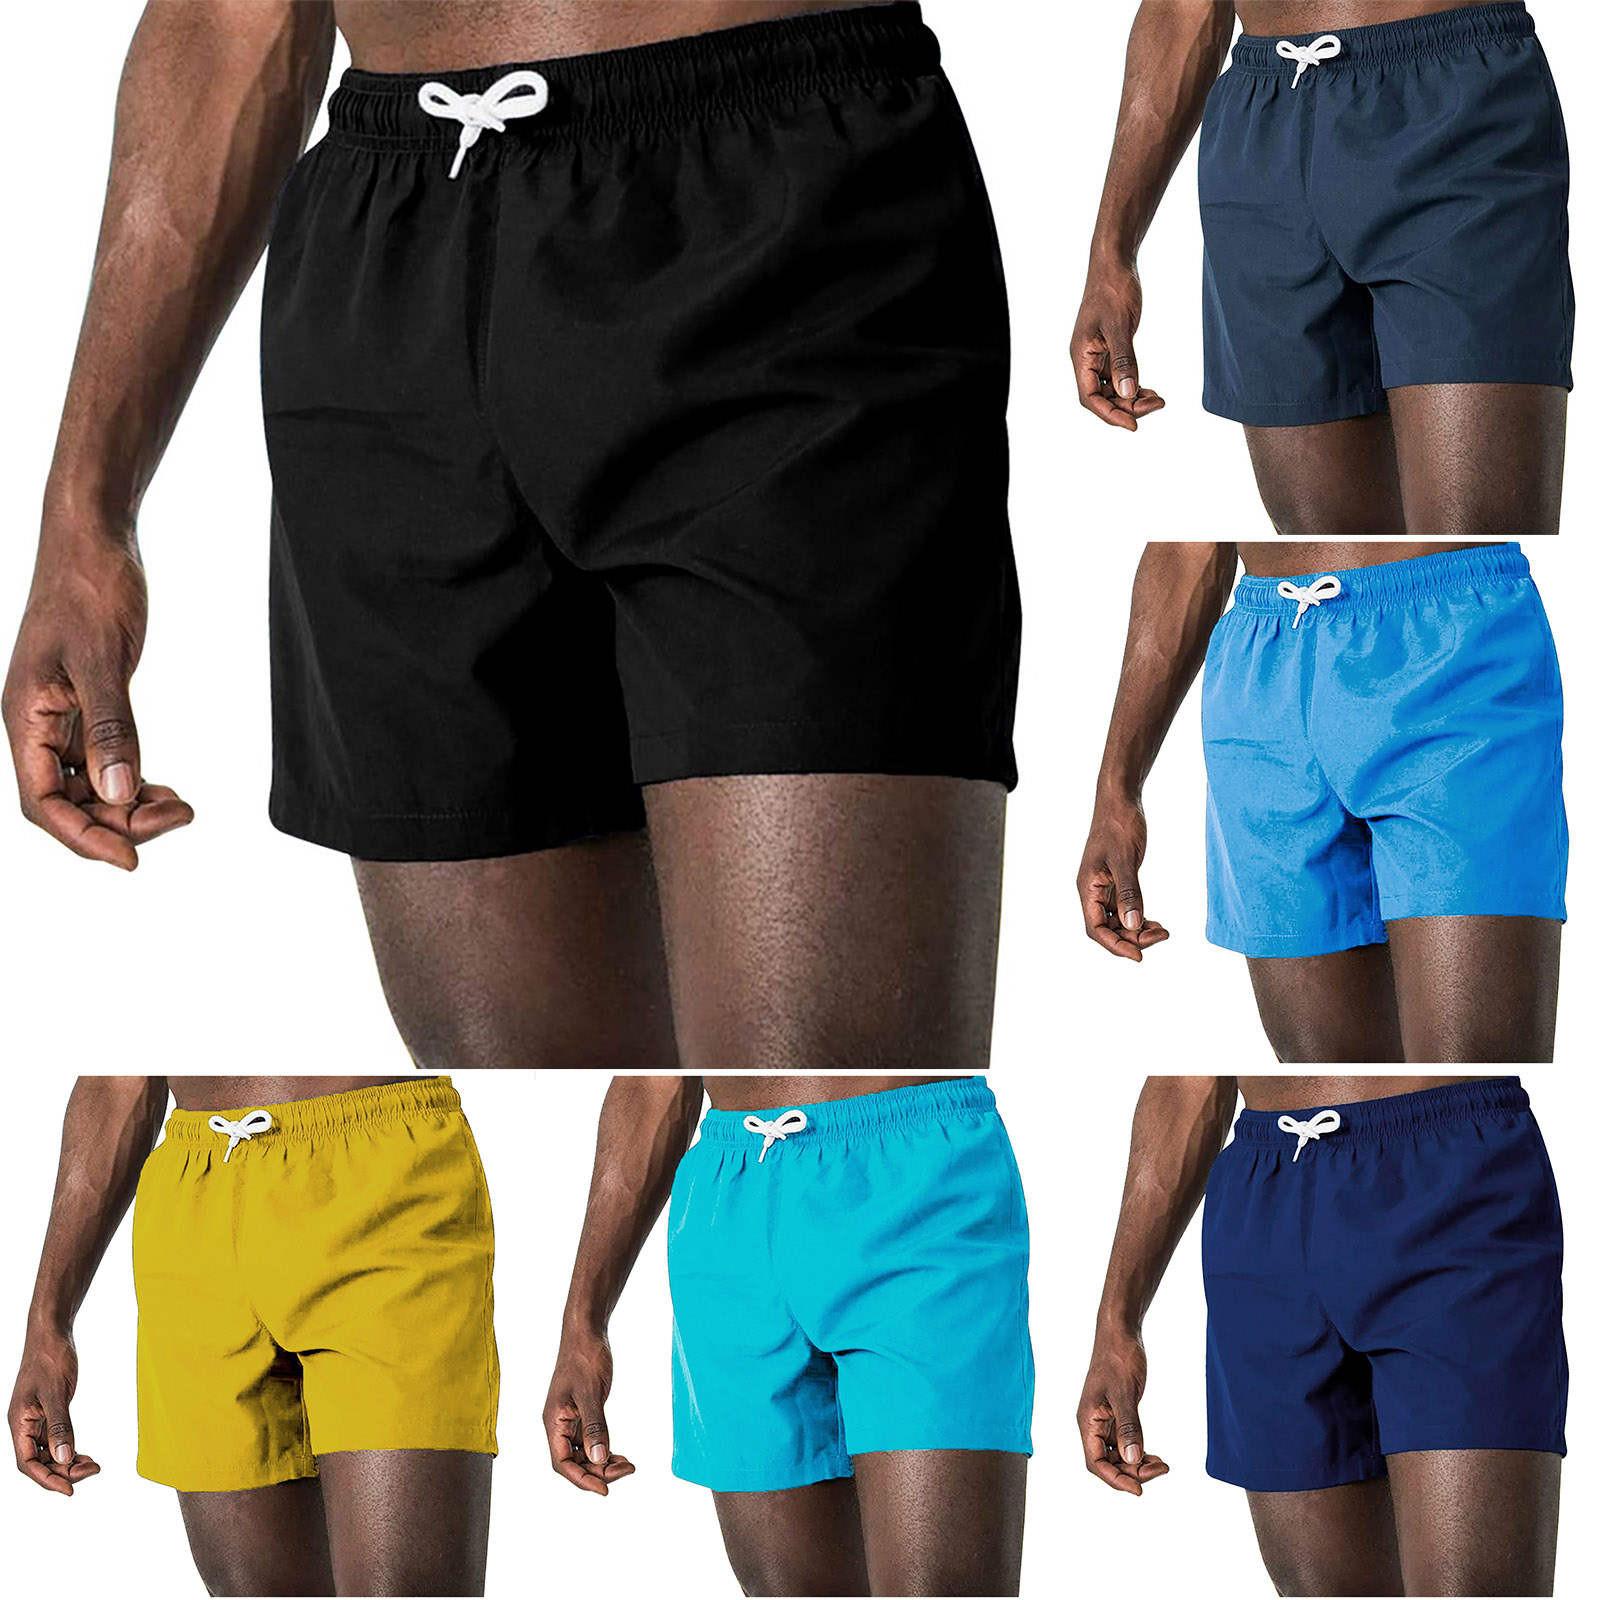 Uniqueness Heren zomer casual sportshorts grote shorts plus maat vijf speed dry bea